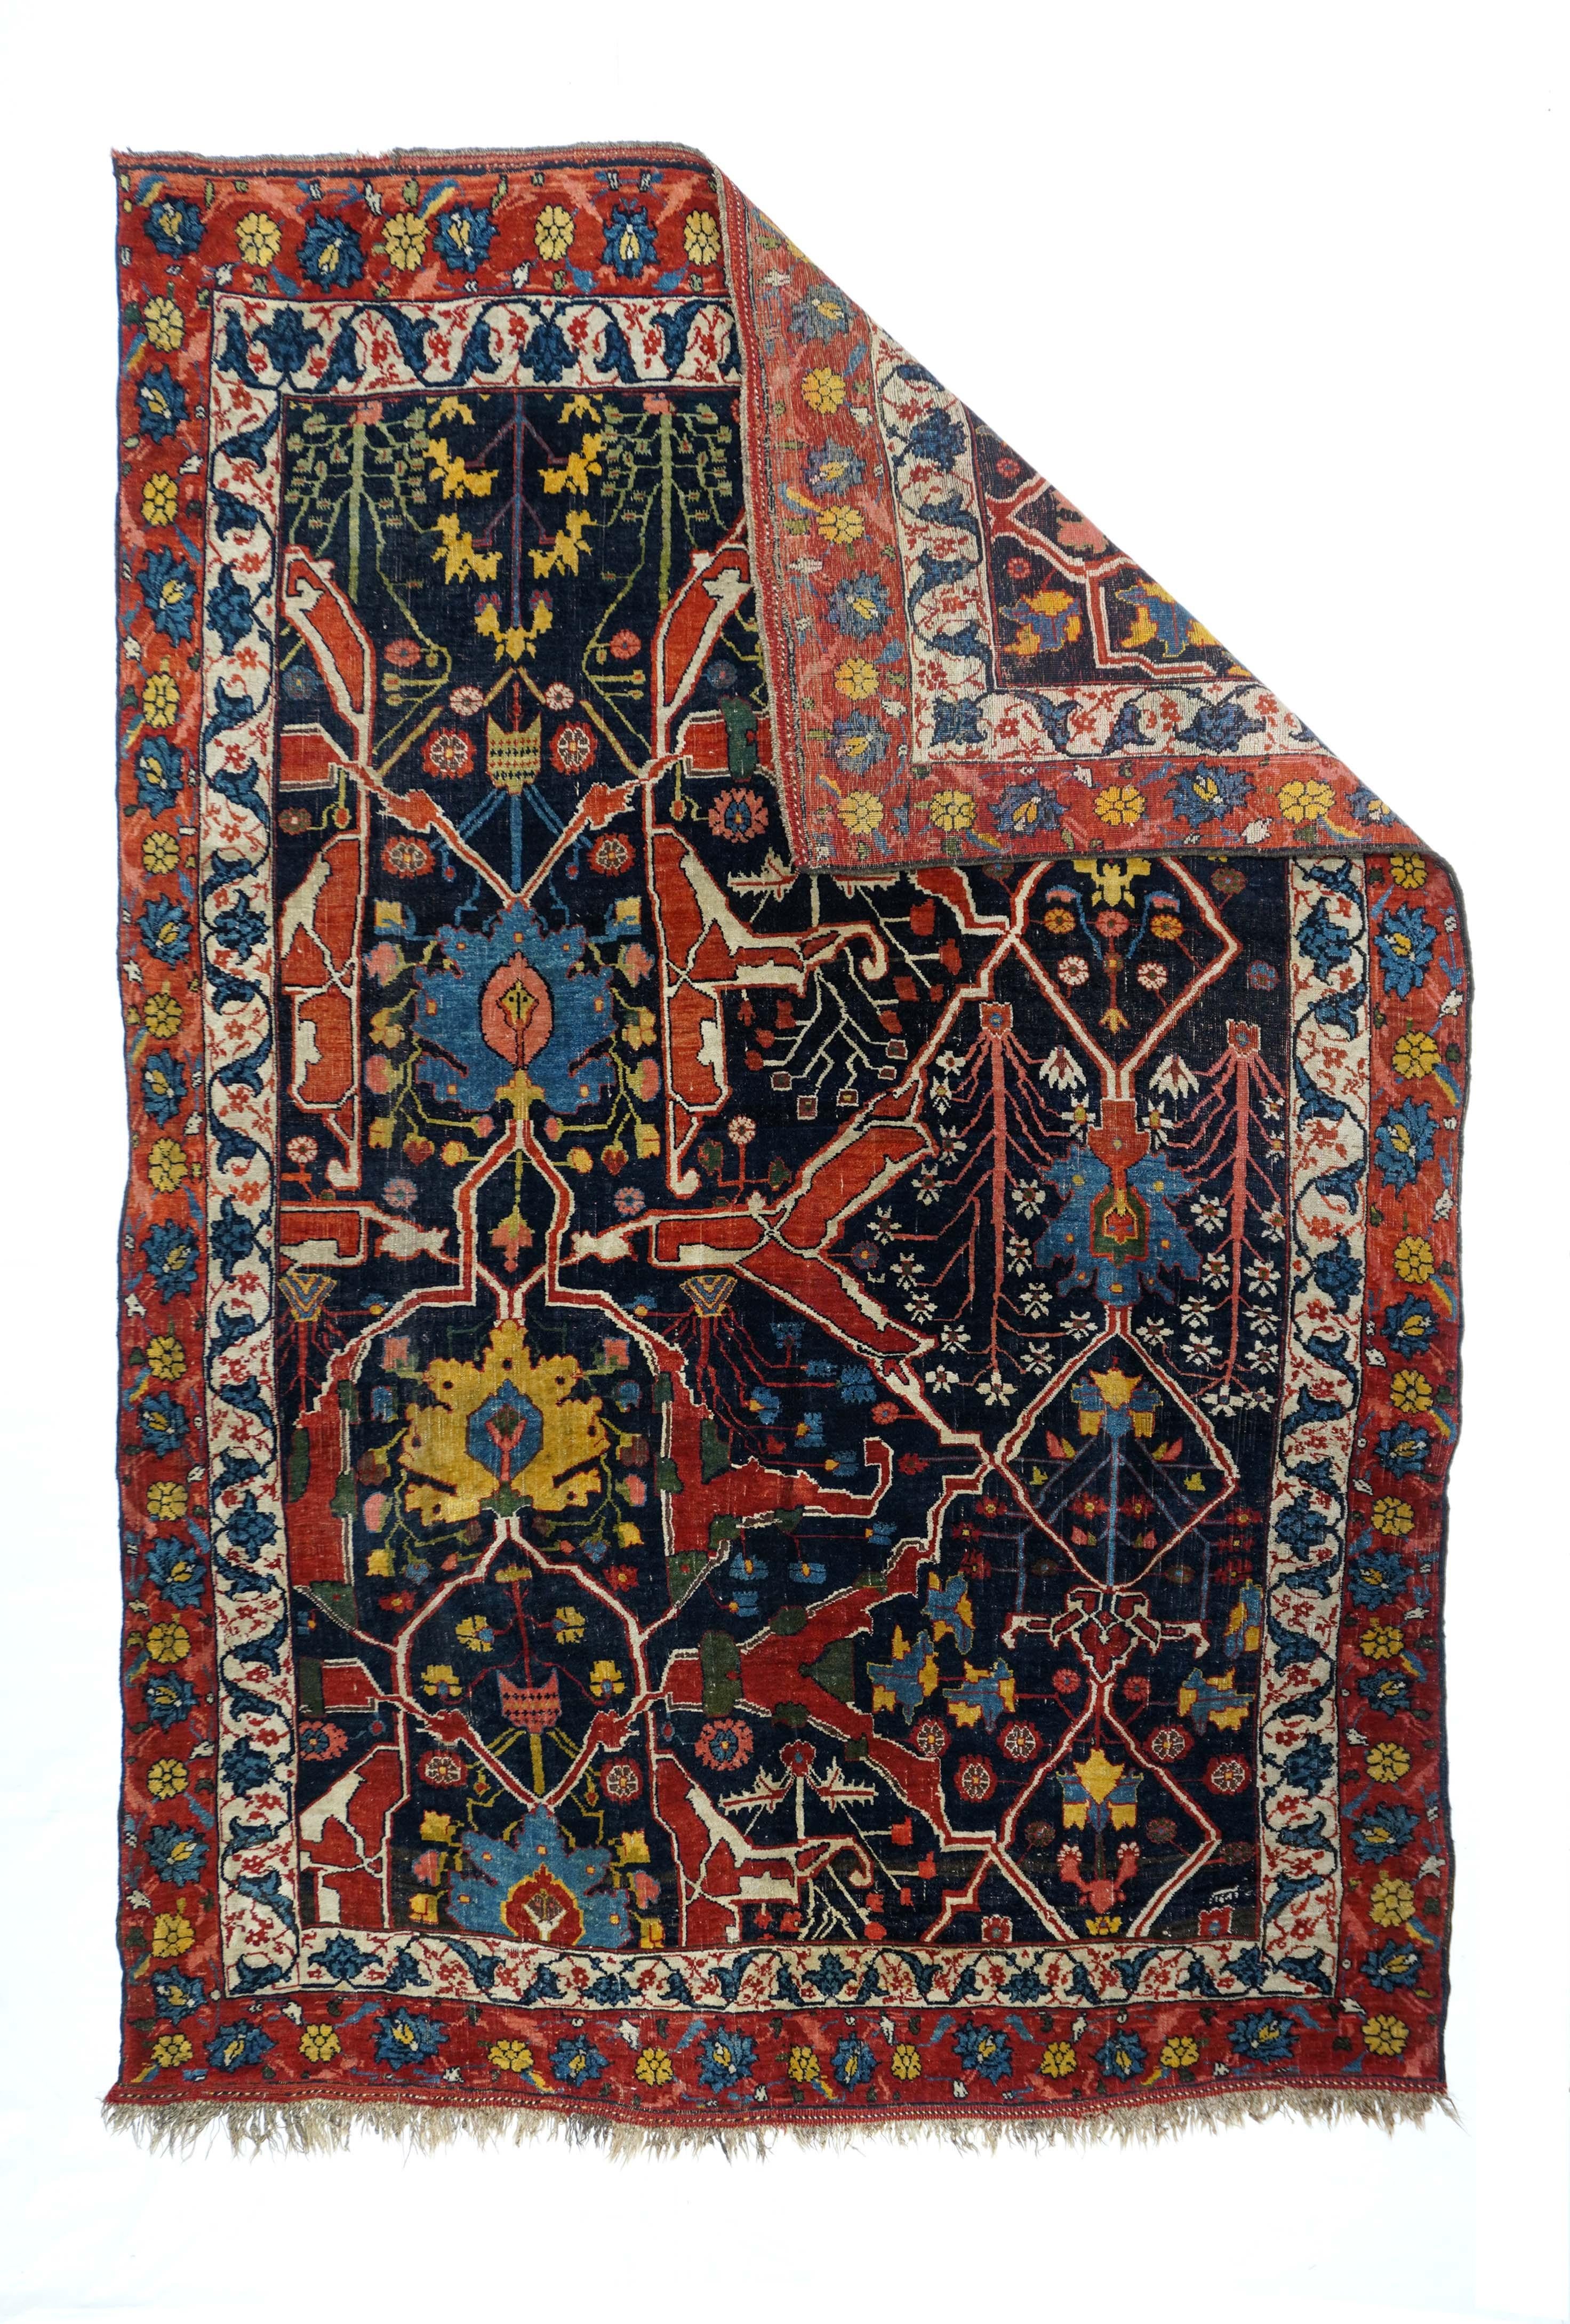 This large, Kurdish urban scatter from the Bidjar-origin town of Garrus shows an offset, partial rendering of the eponymous design of red and cream forked, geometric arabesques, ragged palmettes and small upright flowers on a navy indigo ground.